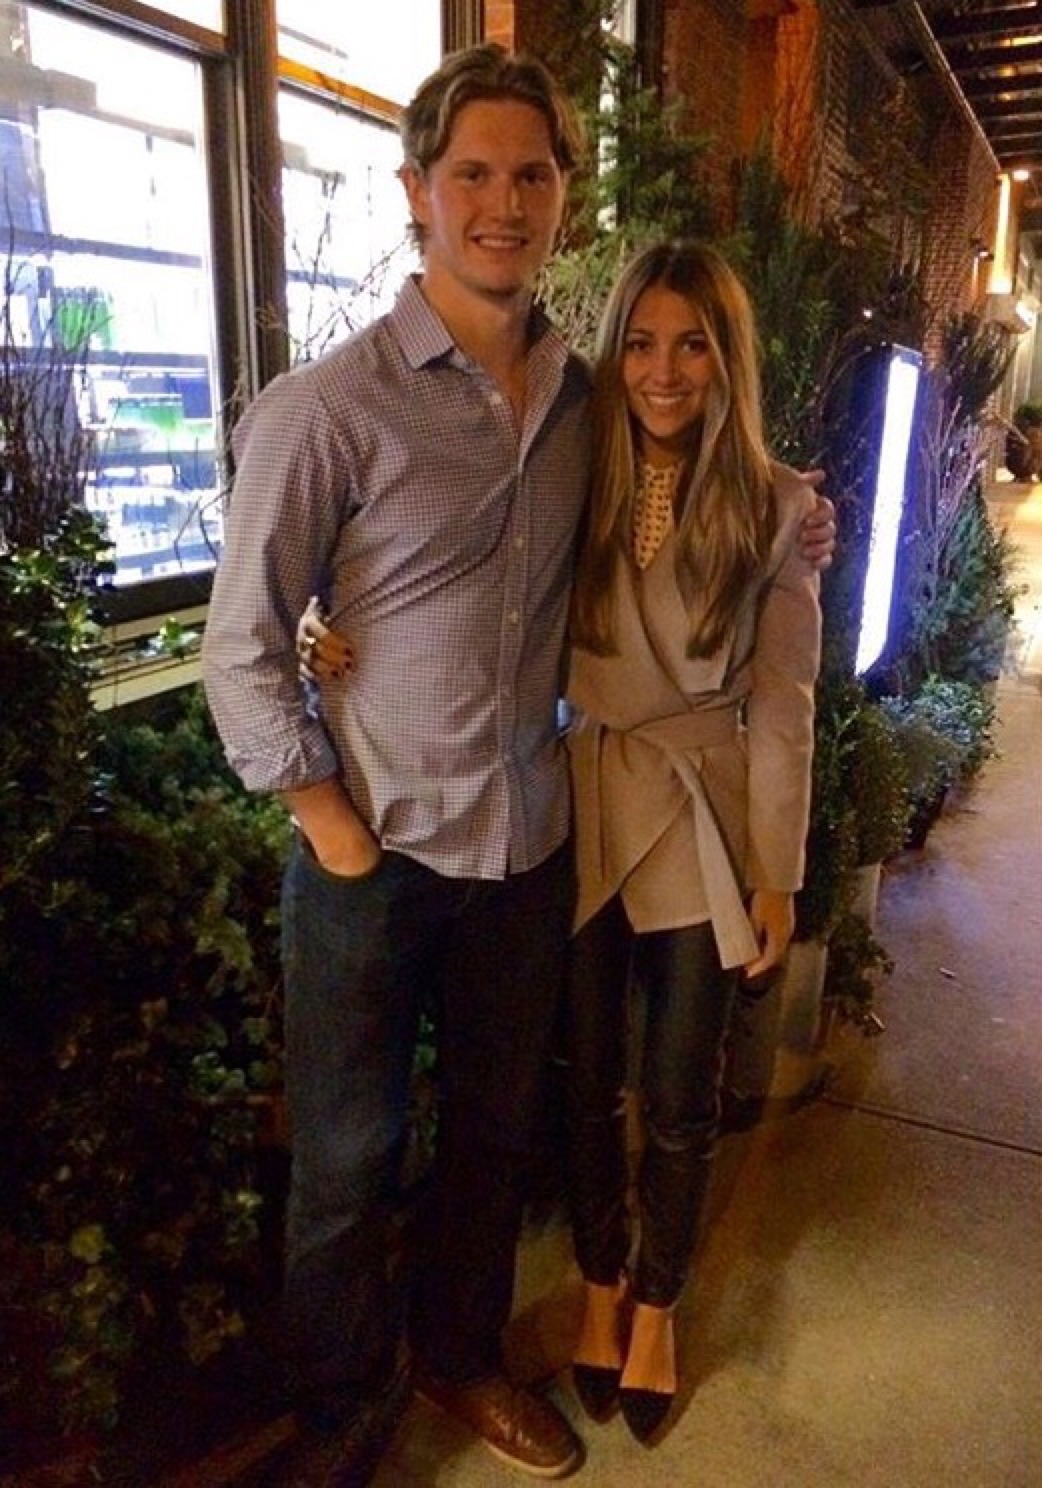 Wives and Girlfriends of NHL players: Jacob Trouba & Kelly Tyson